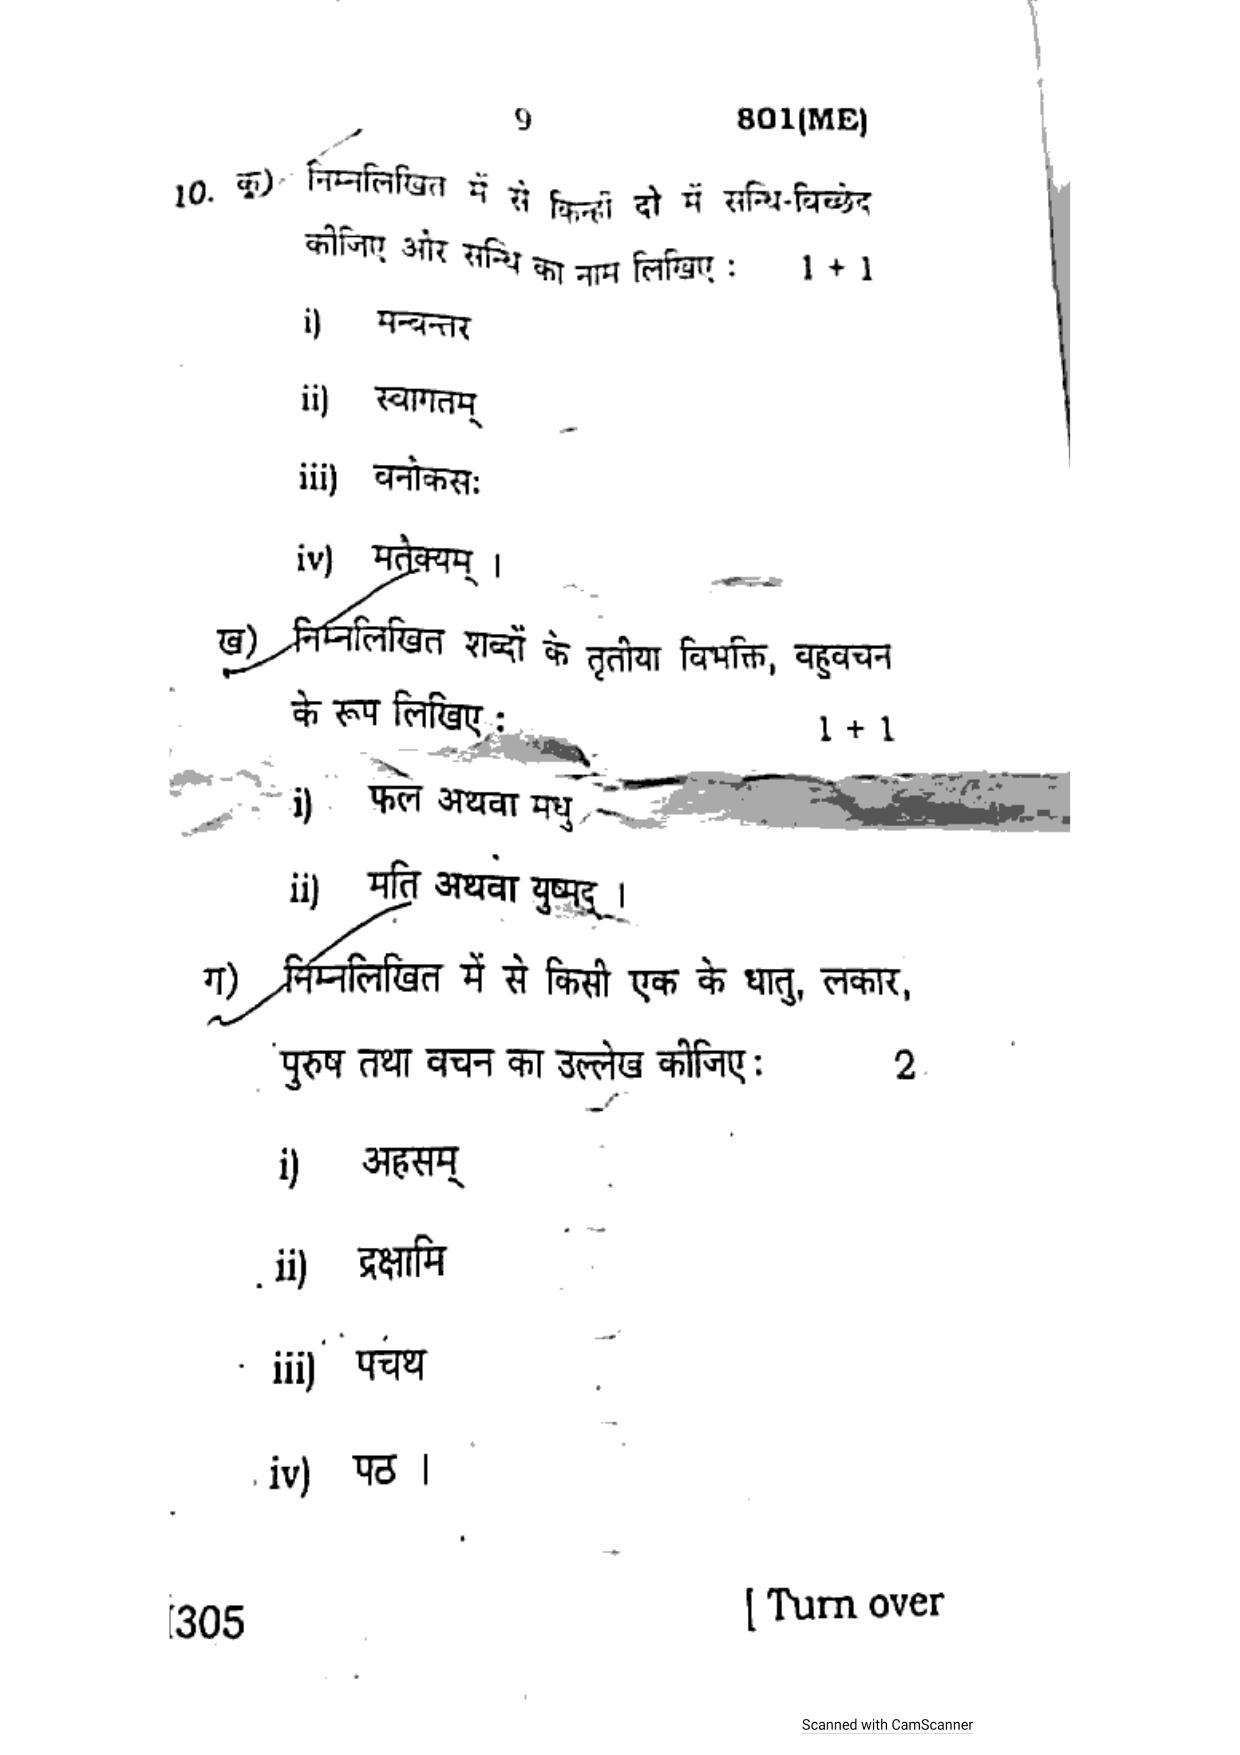 UP Board Previous Year Question Paper Class 10 Hindi (801 ME) – 2020 - Page 9